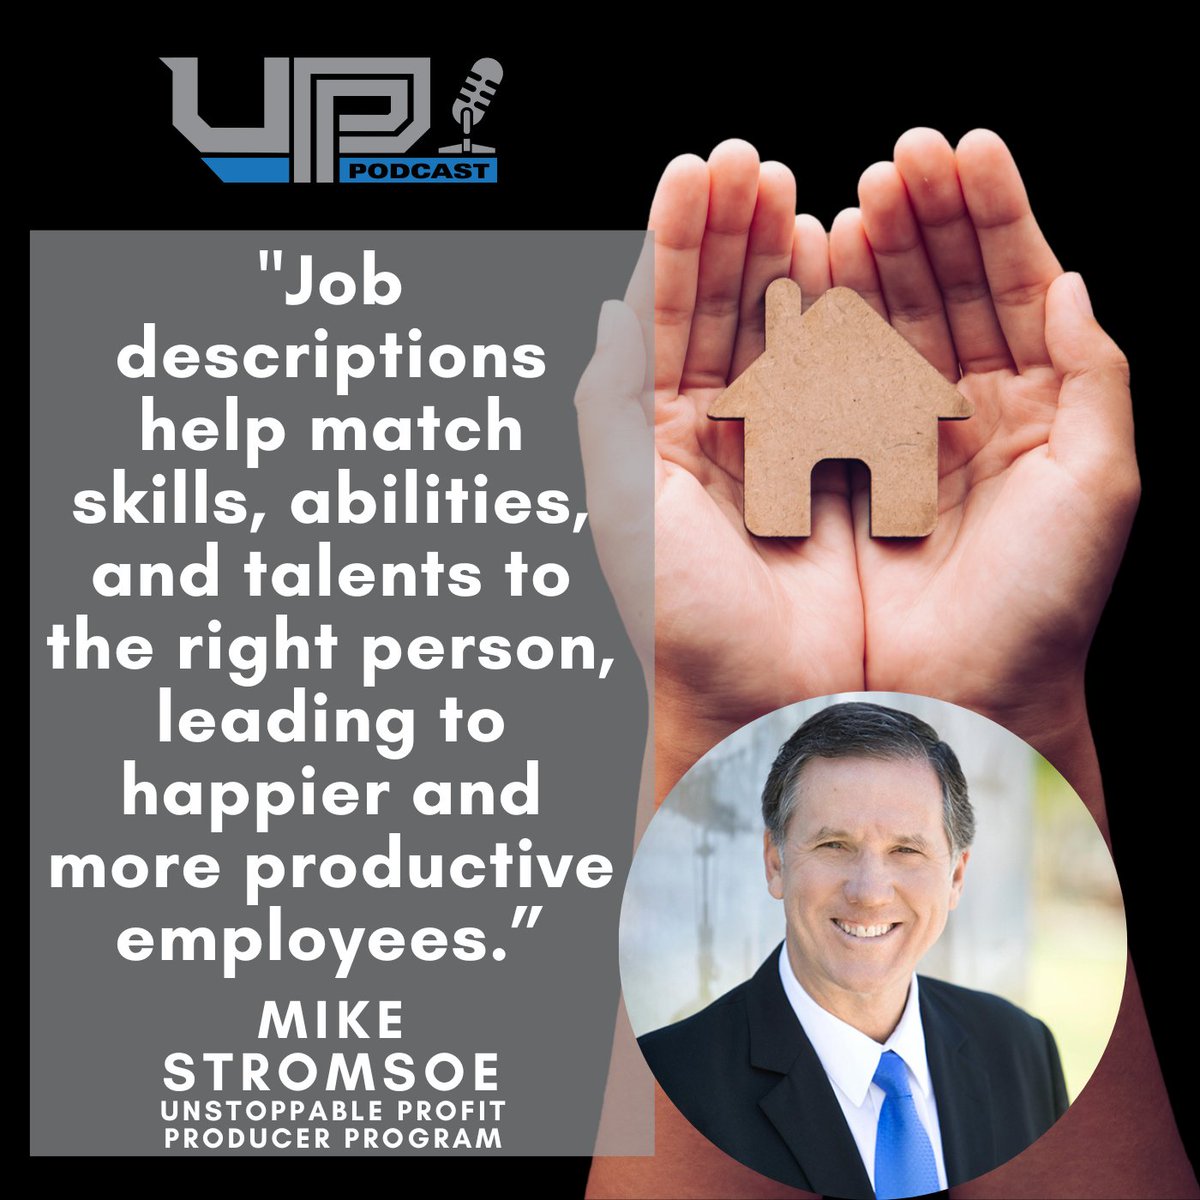 Provide employees them the resources they need, the training they need, and get the heck out of their way.

Listen: bit.ly/UPPE247
Watch: bit.ly/UPPYT247

#UPPLife #Leadership #Coaching #Insurance #JobDescriptions #Hiring #Skills #Abilities #Engagement #Employee